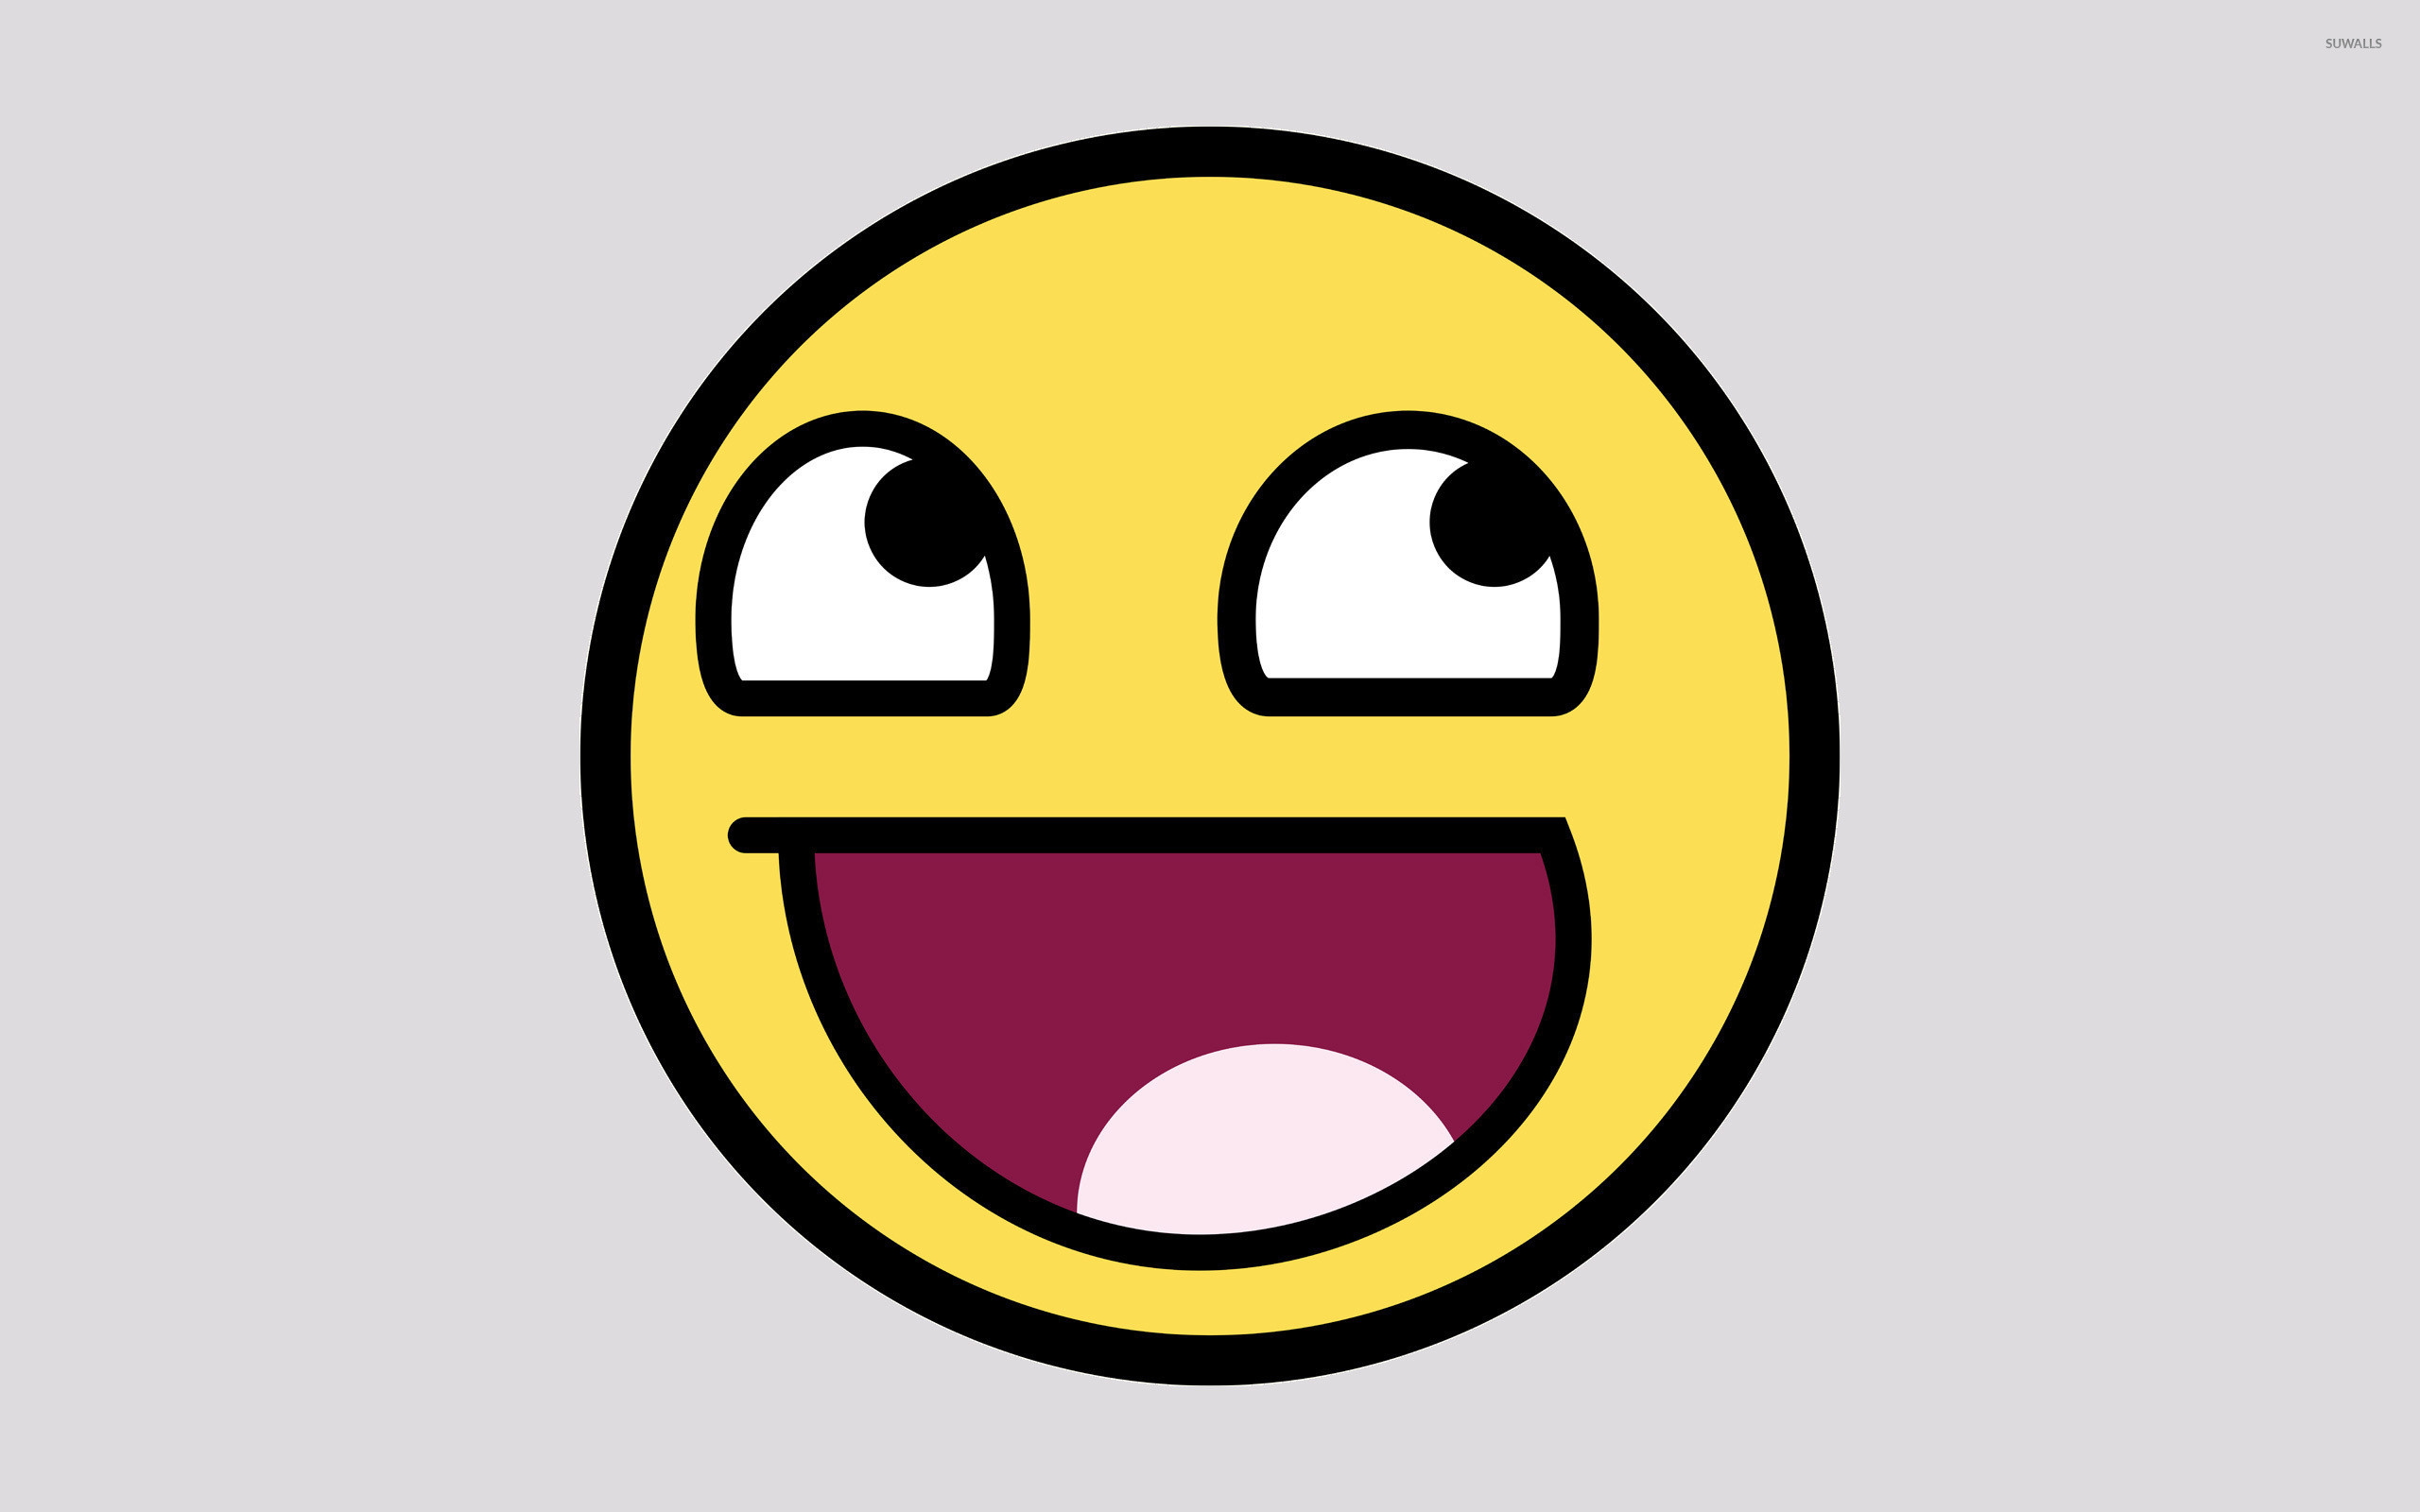 2560x1600 1920x1080 free smiley face wallpaper | awesome smiley wallpaper by hardii  customization wallpaper fantasy .